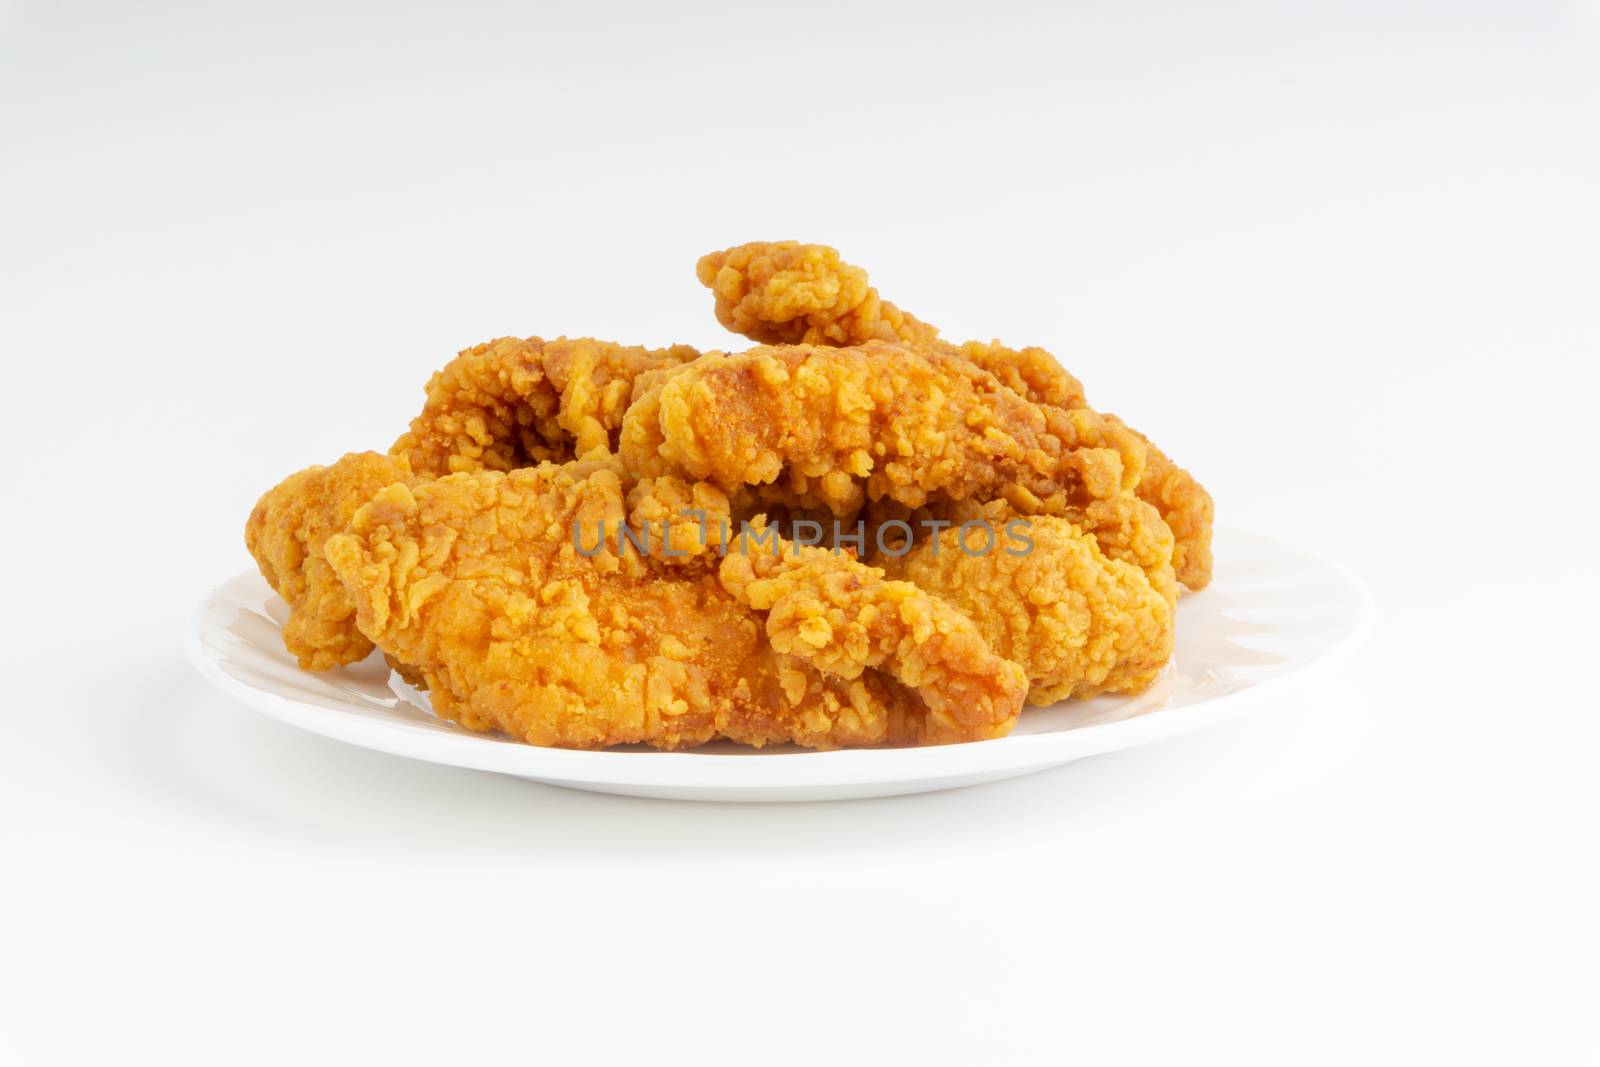 Fried breaded chicken fillet isolated on white background 